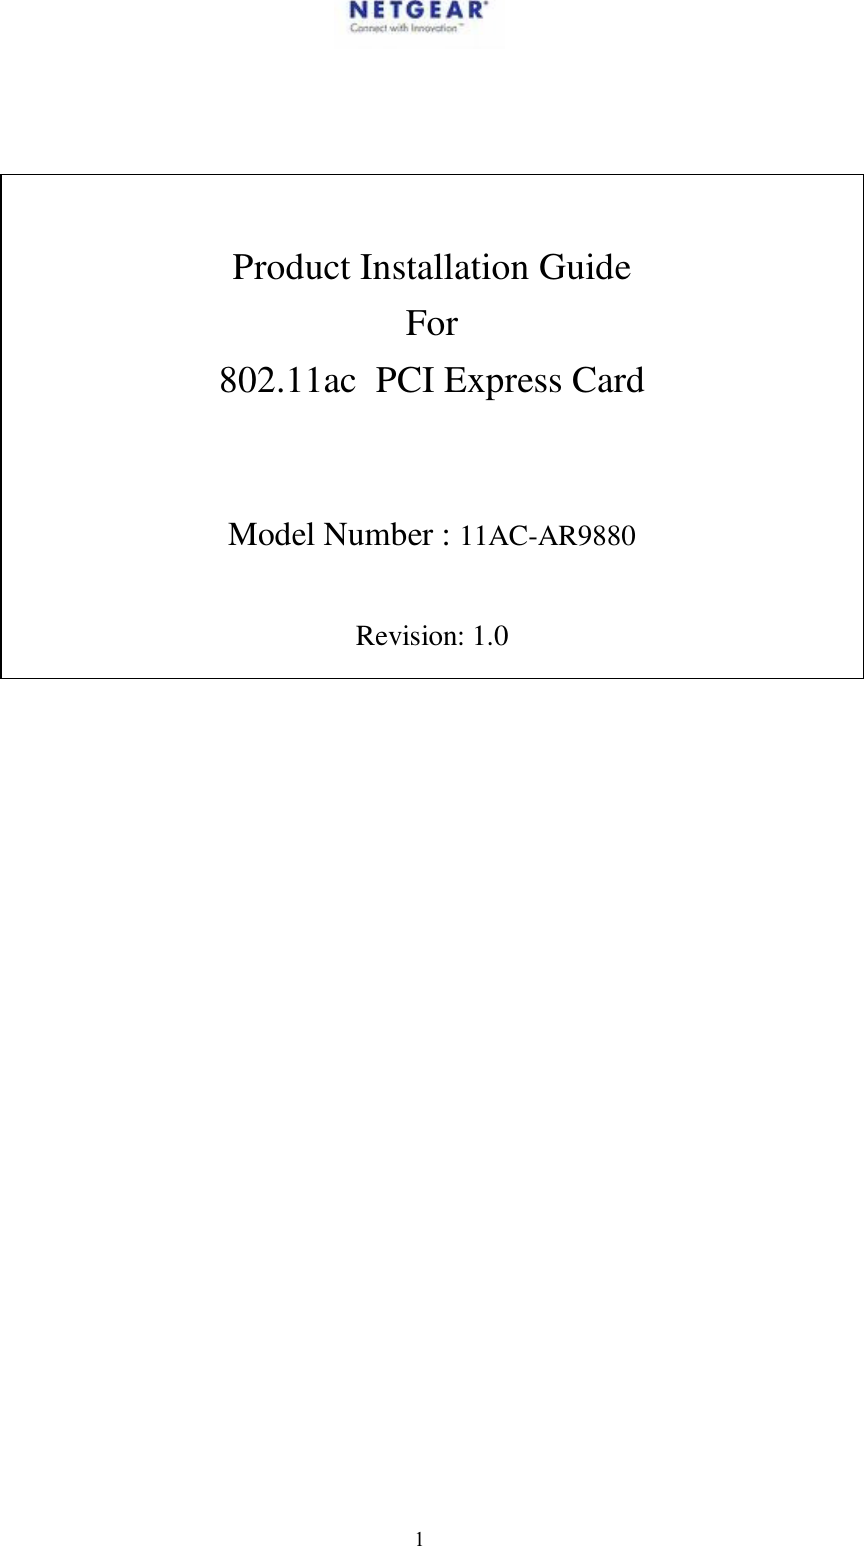    1       Product Installation Guide For 802.11ac  PCI Express Card   Model Number : 11AC-AR9880  Revision: 1.0                             